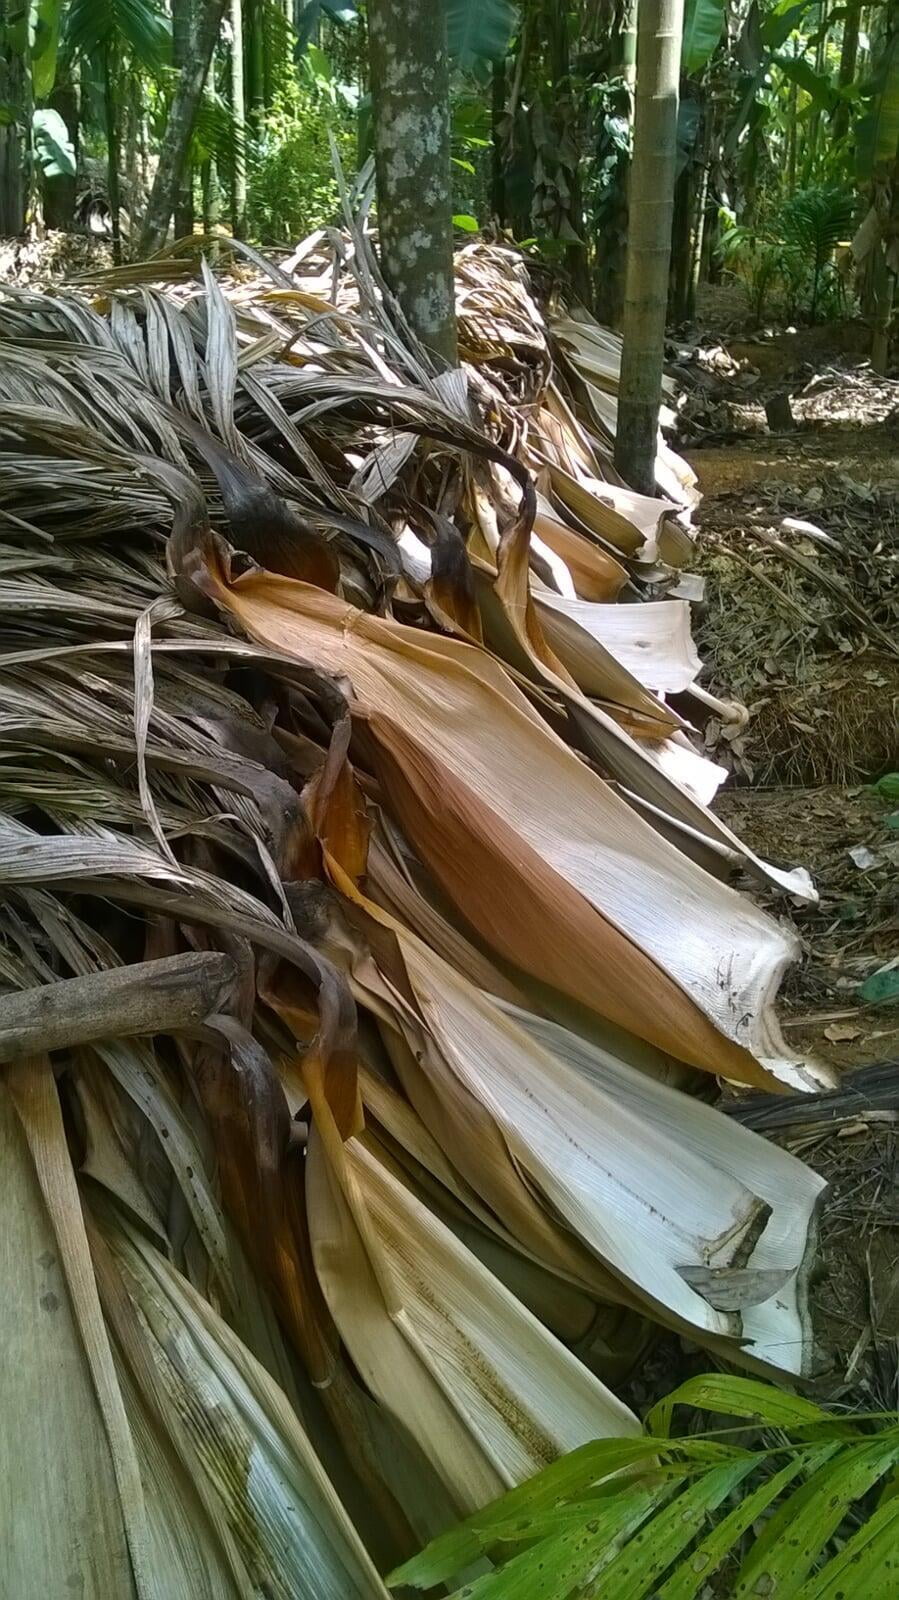 How are areca leaves cleaned before processing?